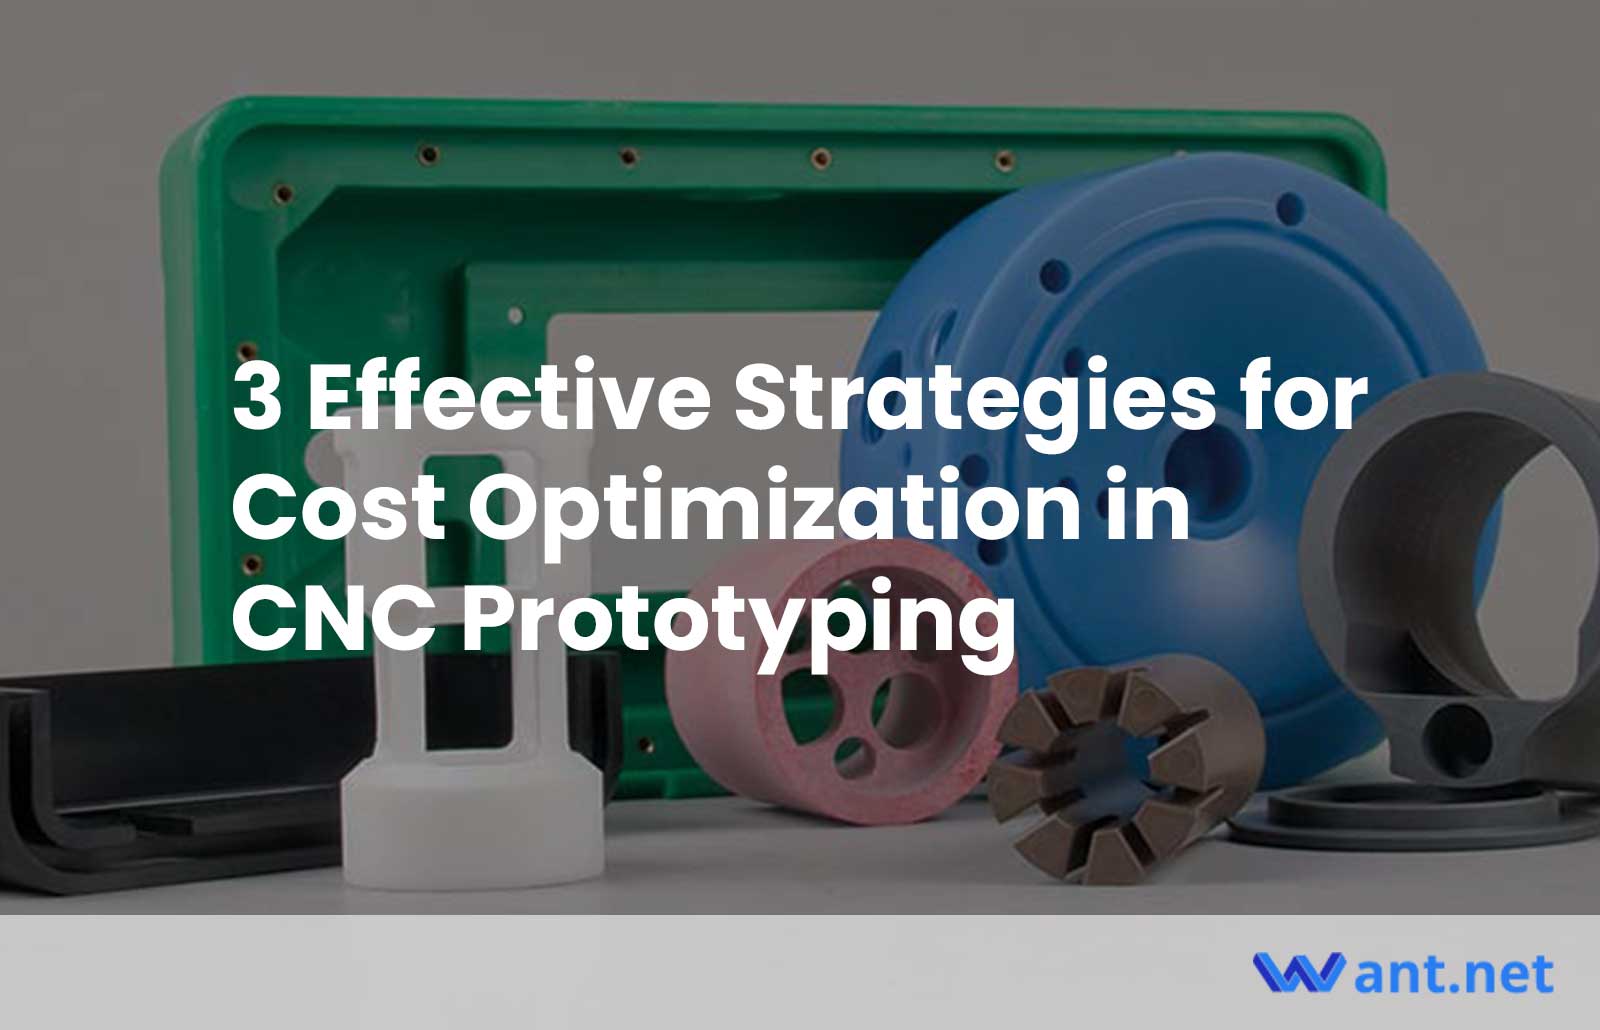 3 Effective Strategies for Cost Optimization in CNC Prototyping